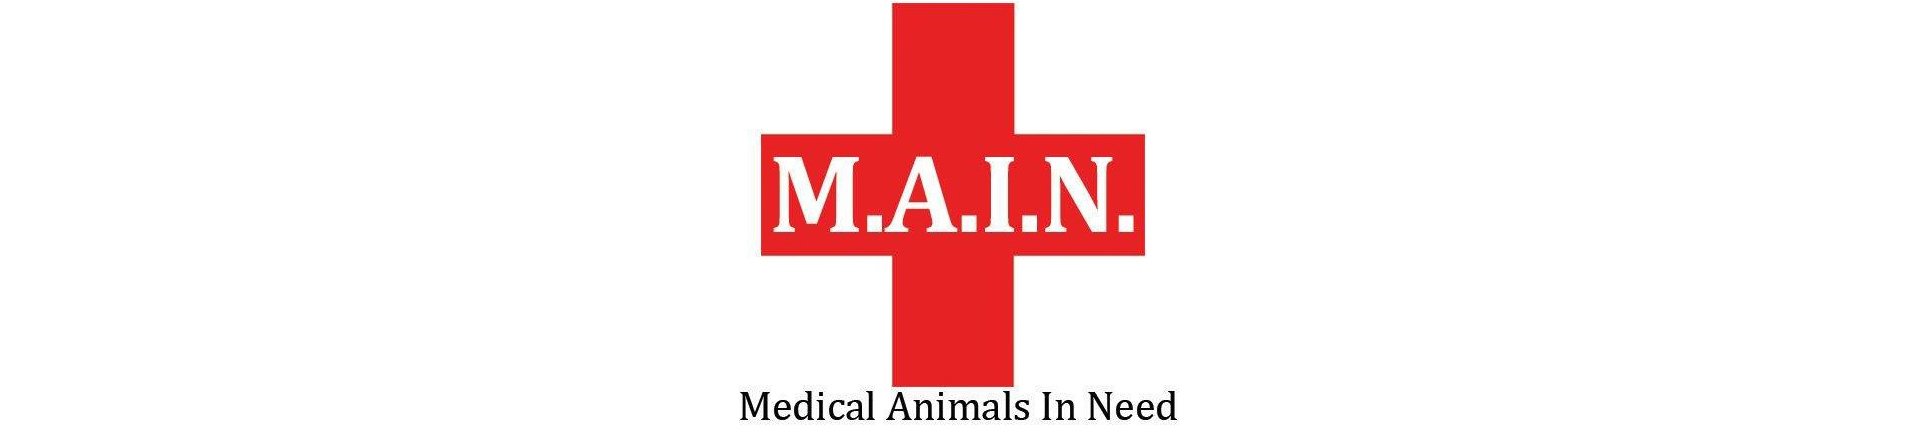 Medical Animals In Need